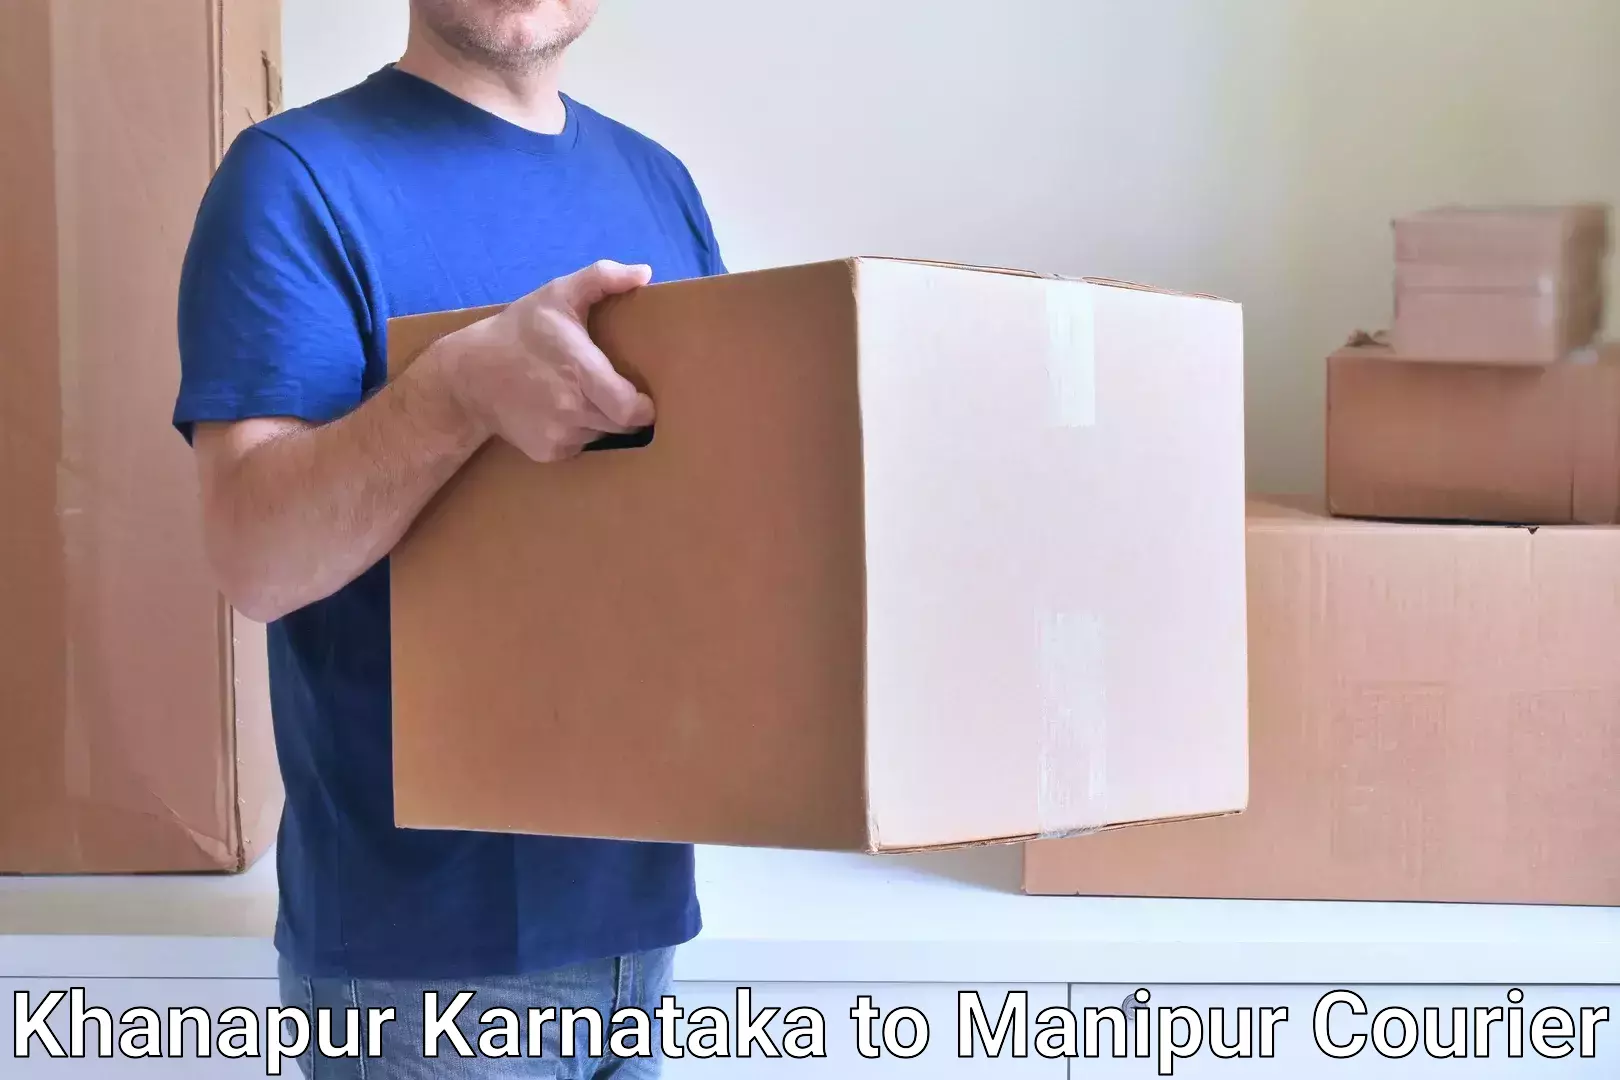 Tailored delivery services Khanapur Karnataka to Manipur